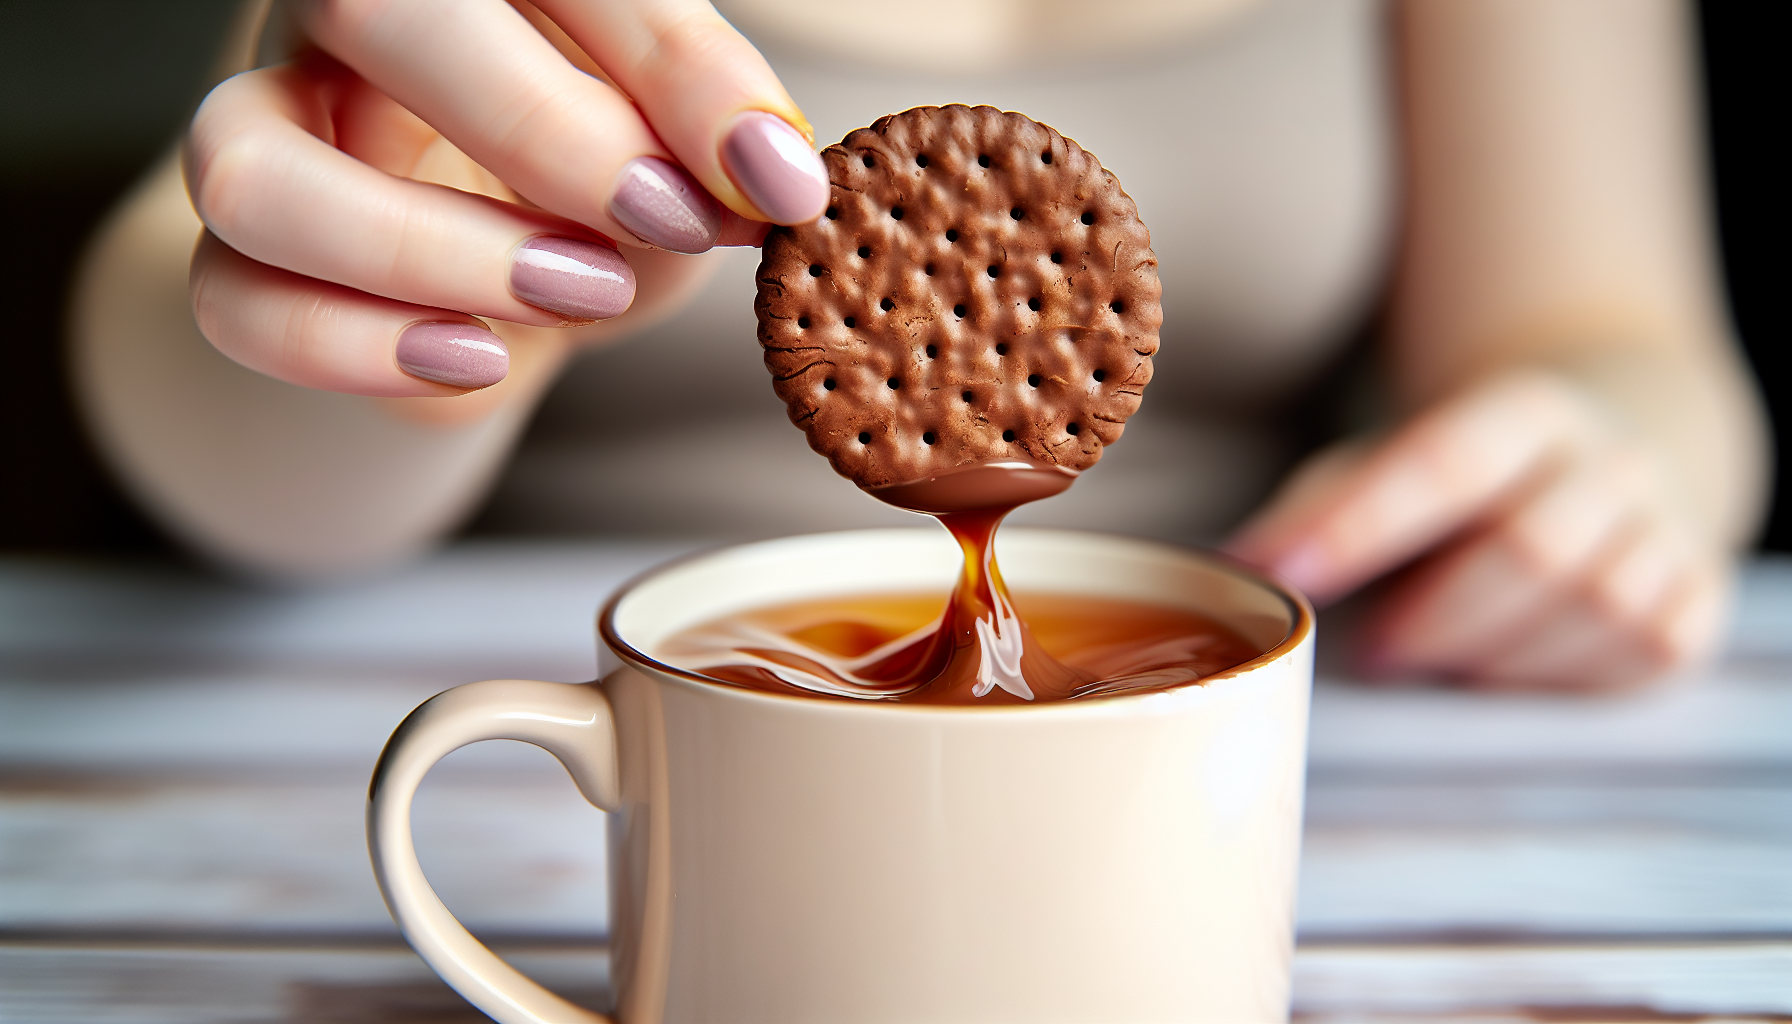 Dunking a chocolate digestive in a cup of tea